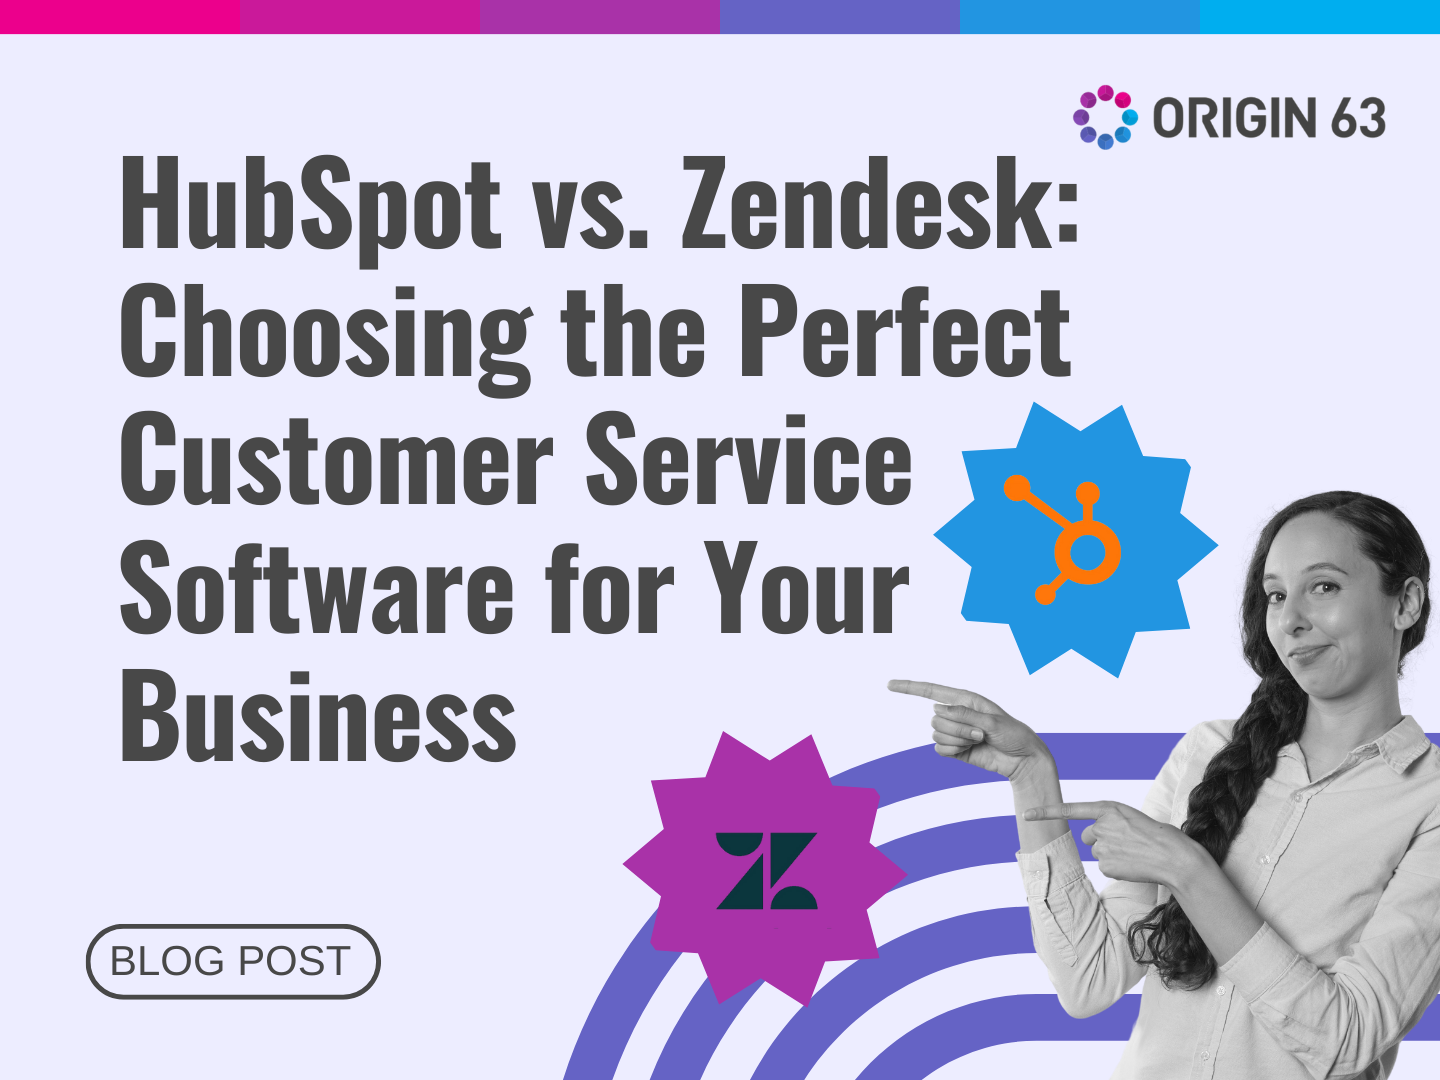 Compare HubSpot and Zendesk to find the ideal customer service software for your business.